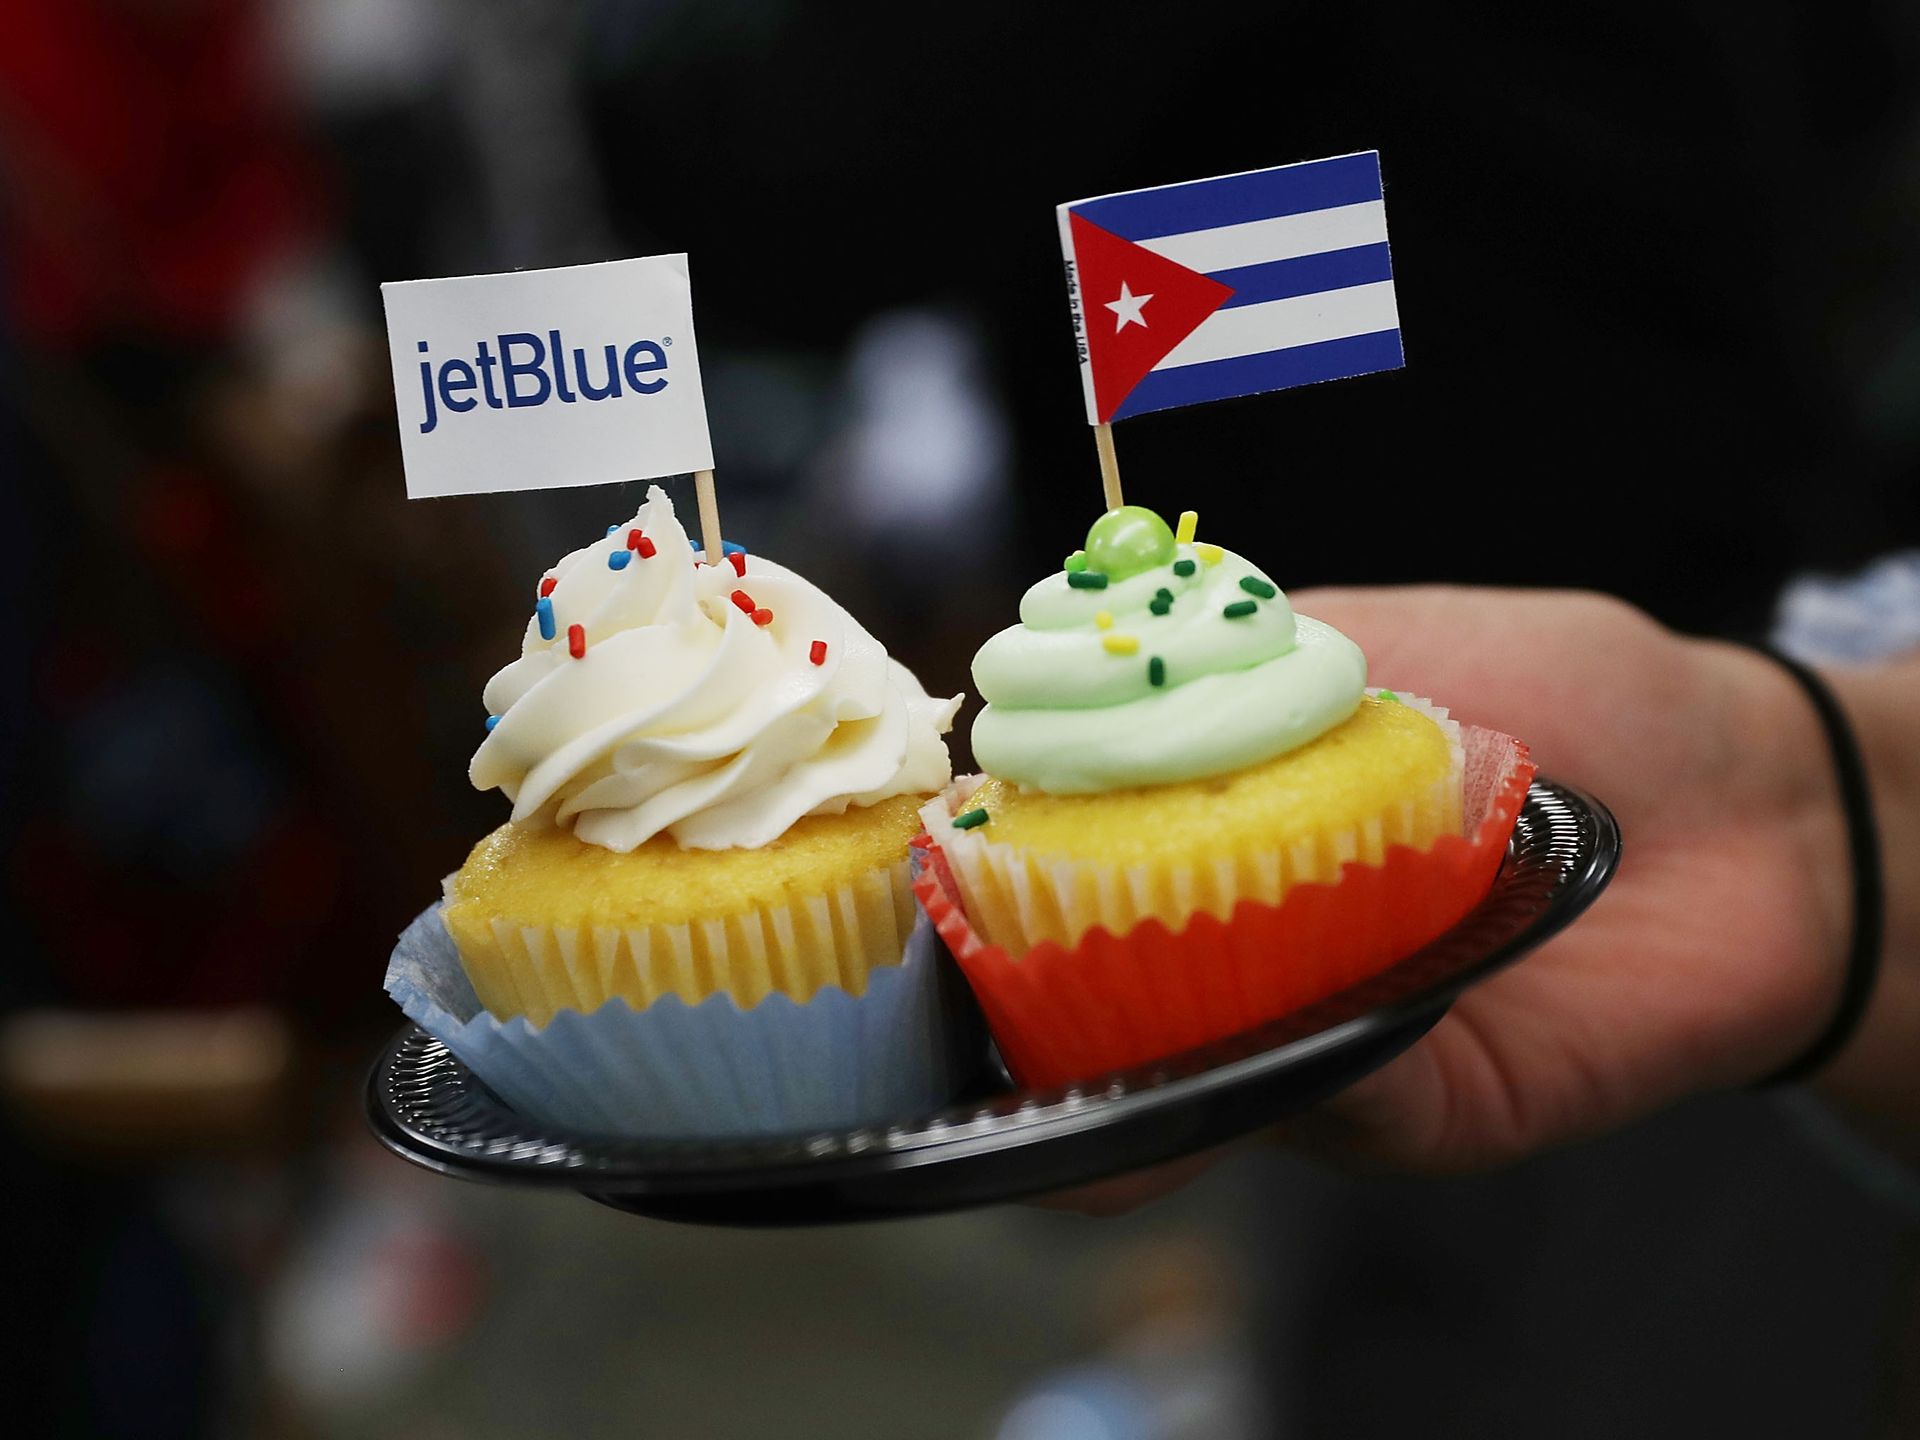 Cuban pastries prepared for the inauguration of regular flights between U.S. and Cuba. Photo by USA Today.